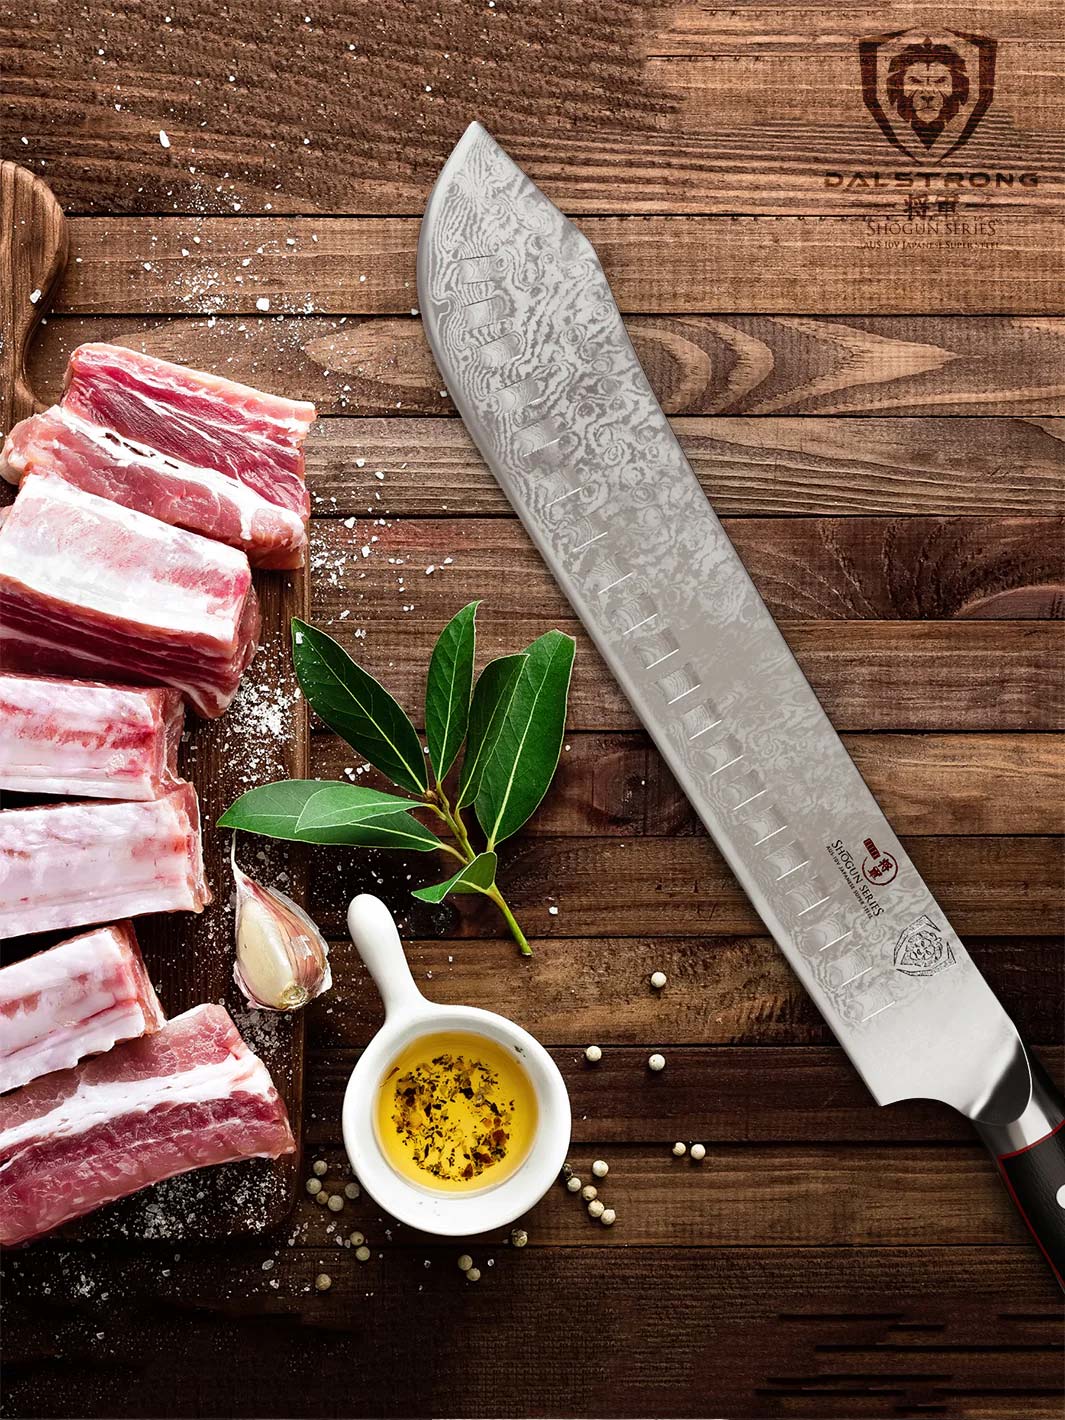 Dalstrong shogun series 10 inch bullnose butcher knife with black handle and six cuts of meat on a wooden board.